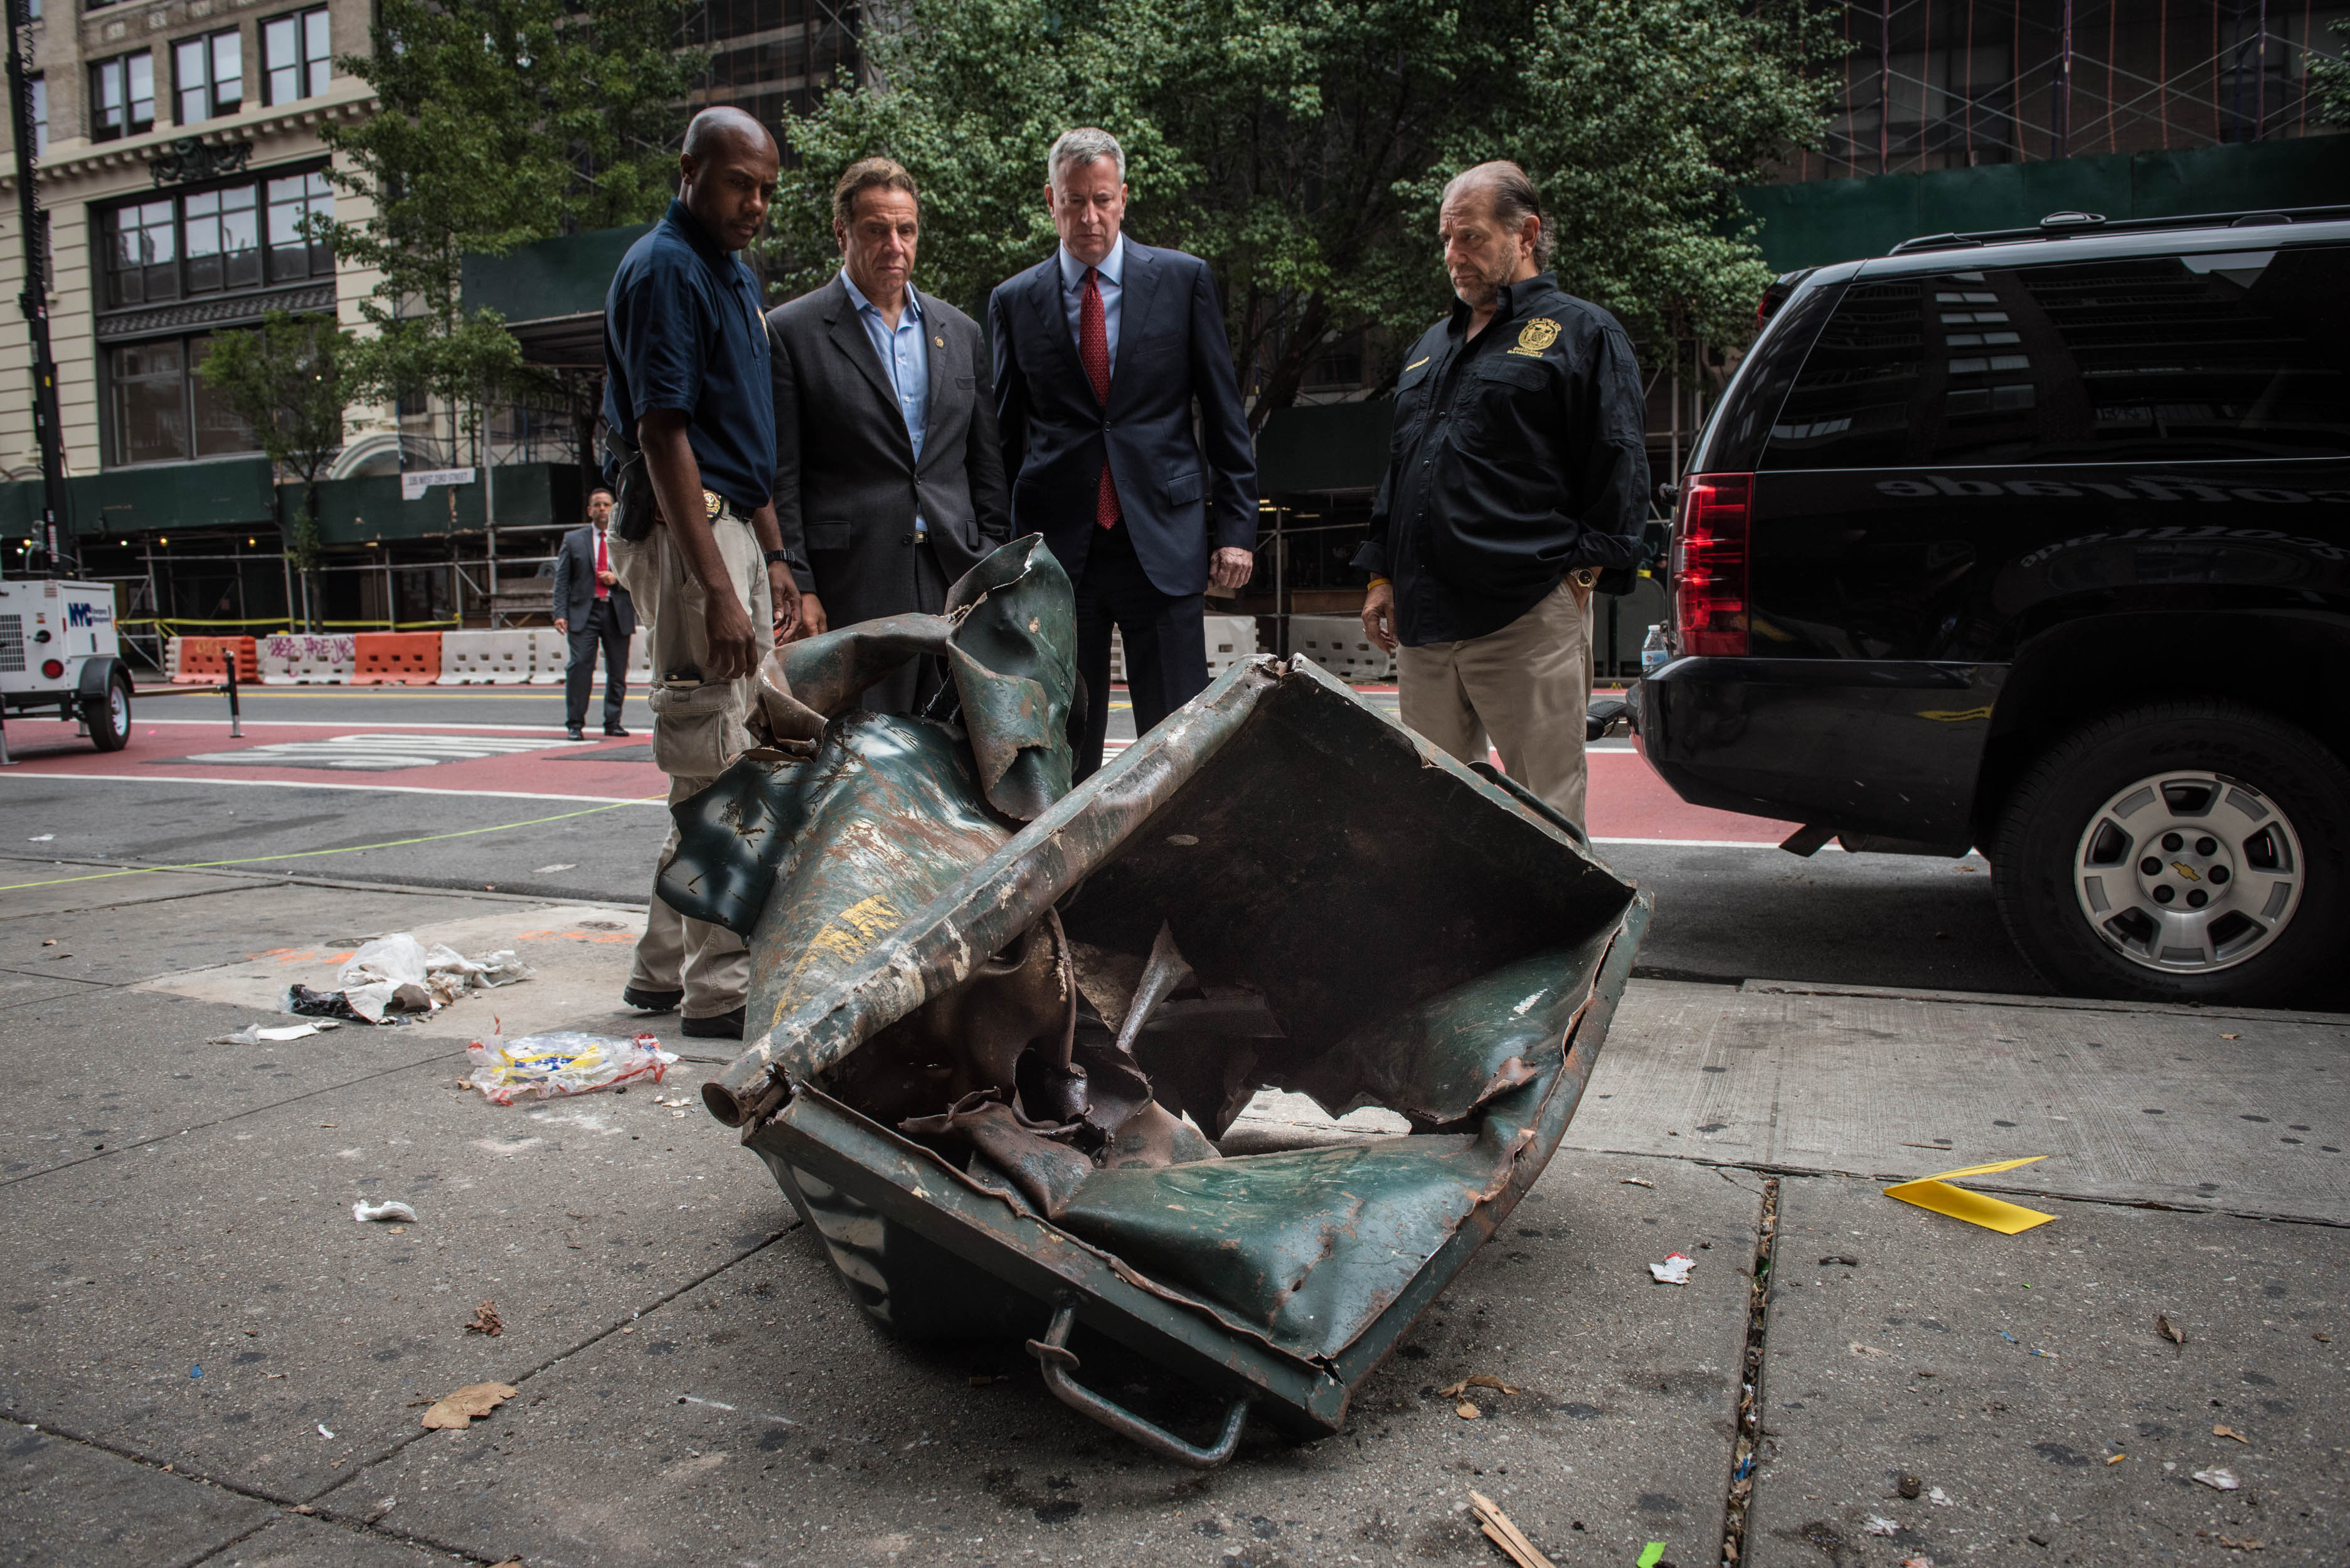 Governor Cuomo and Mayor de Blasio inspecting the small dumpster on W. 23rd St., either inside of which or next to the bomb was located. Photo by Michael Appleton / Mayoral Photography Office.